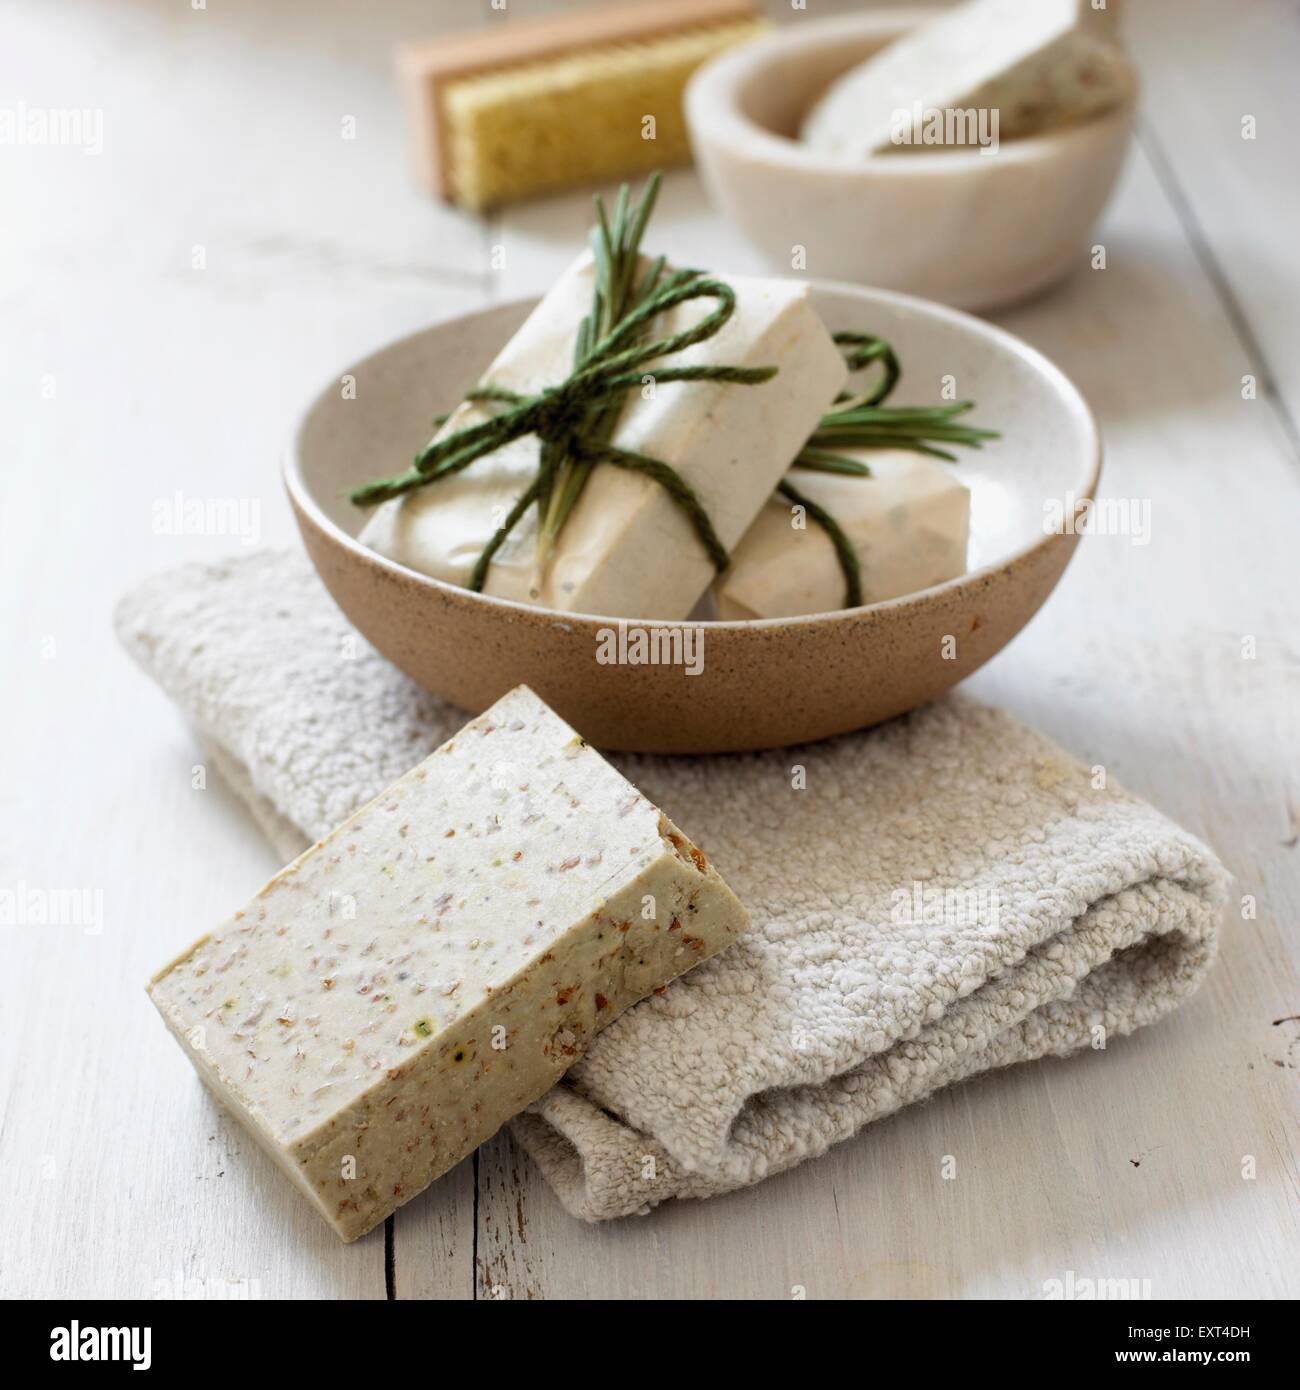 Rosemary soap in a bowl and on towel, close-up Stock Photo